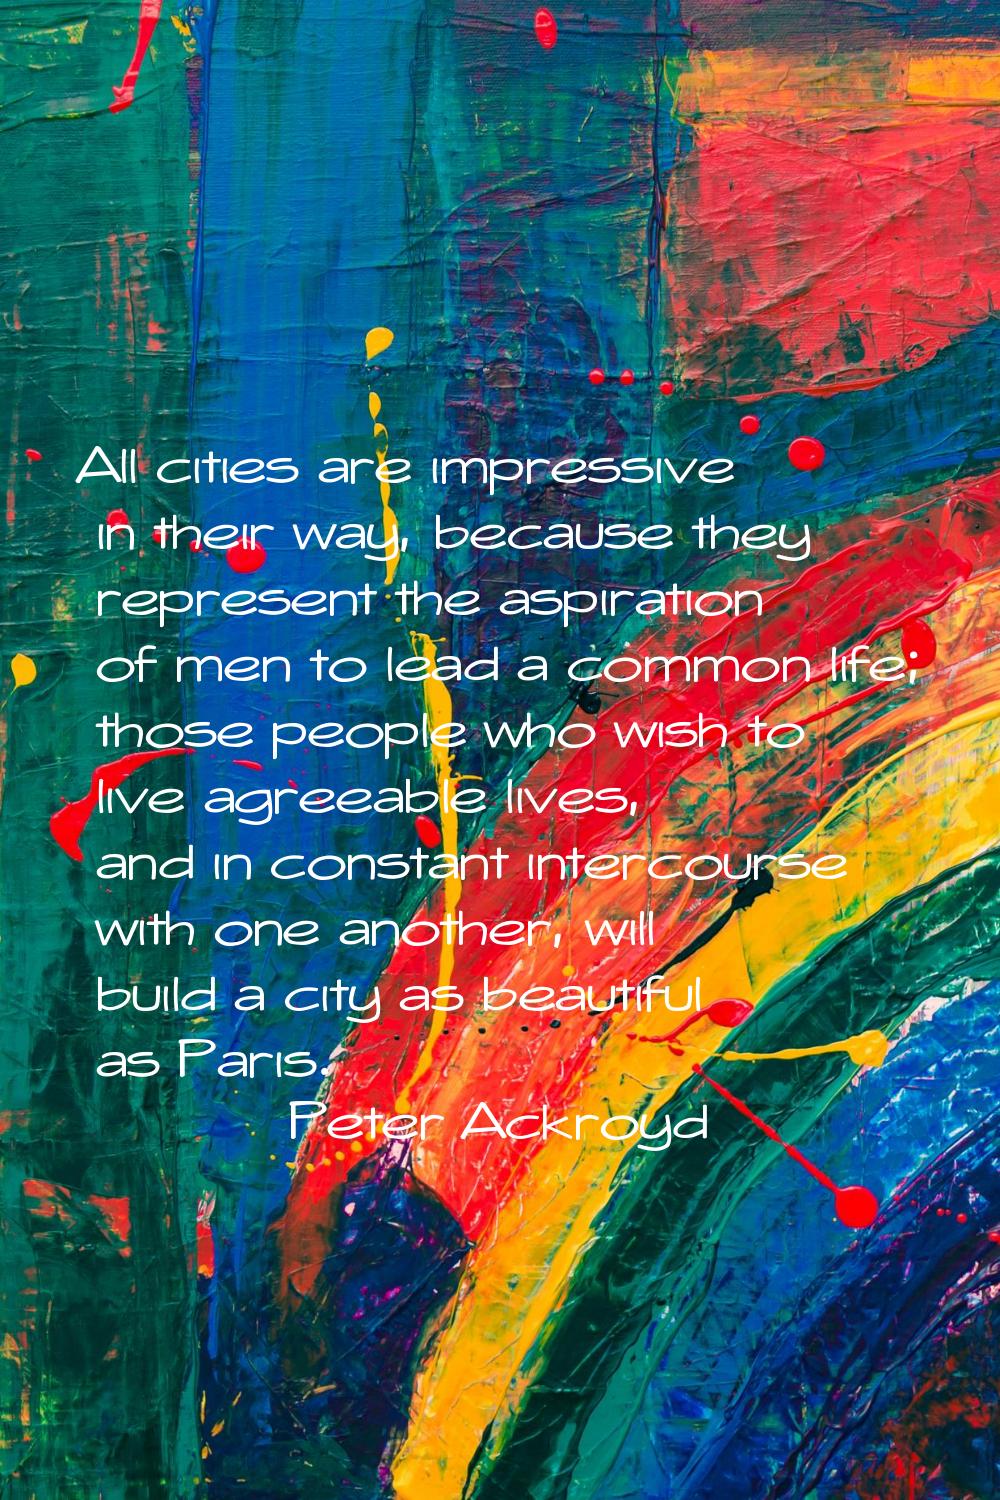 All cities are impressive in their way, because they represent the aspiration of men to lead a comm